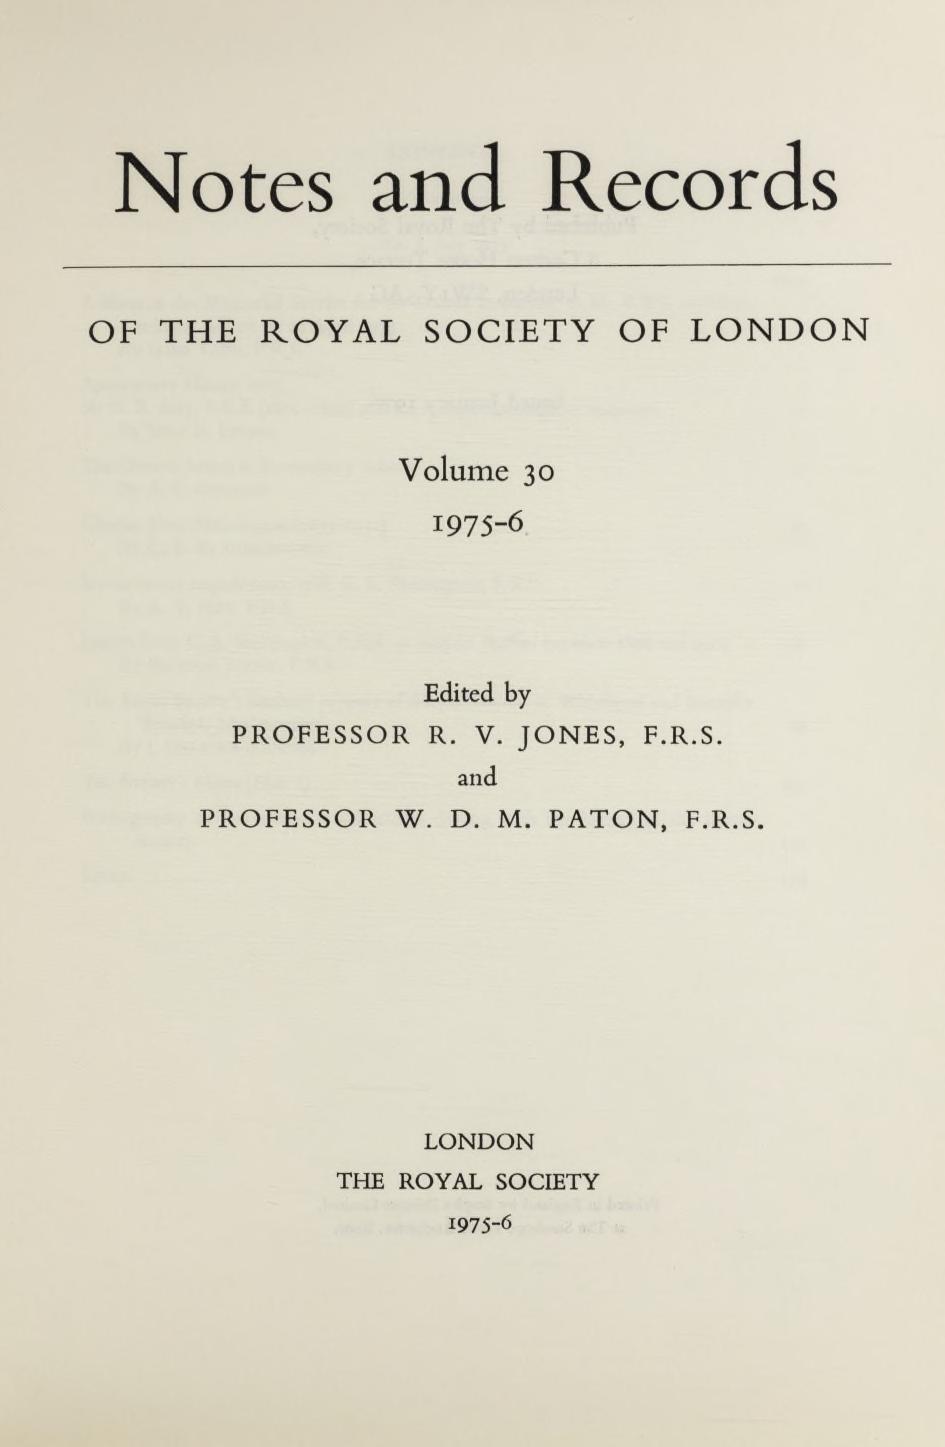 Notes and Records OF THE ROYAL SOCIETY OF LO N D O N Volume 30 1975-6 Edited by PROFESSOR R.